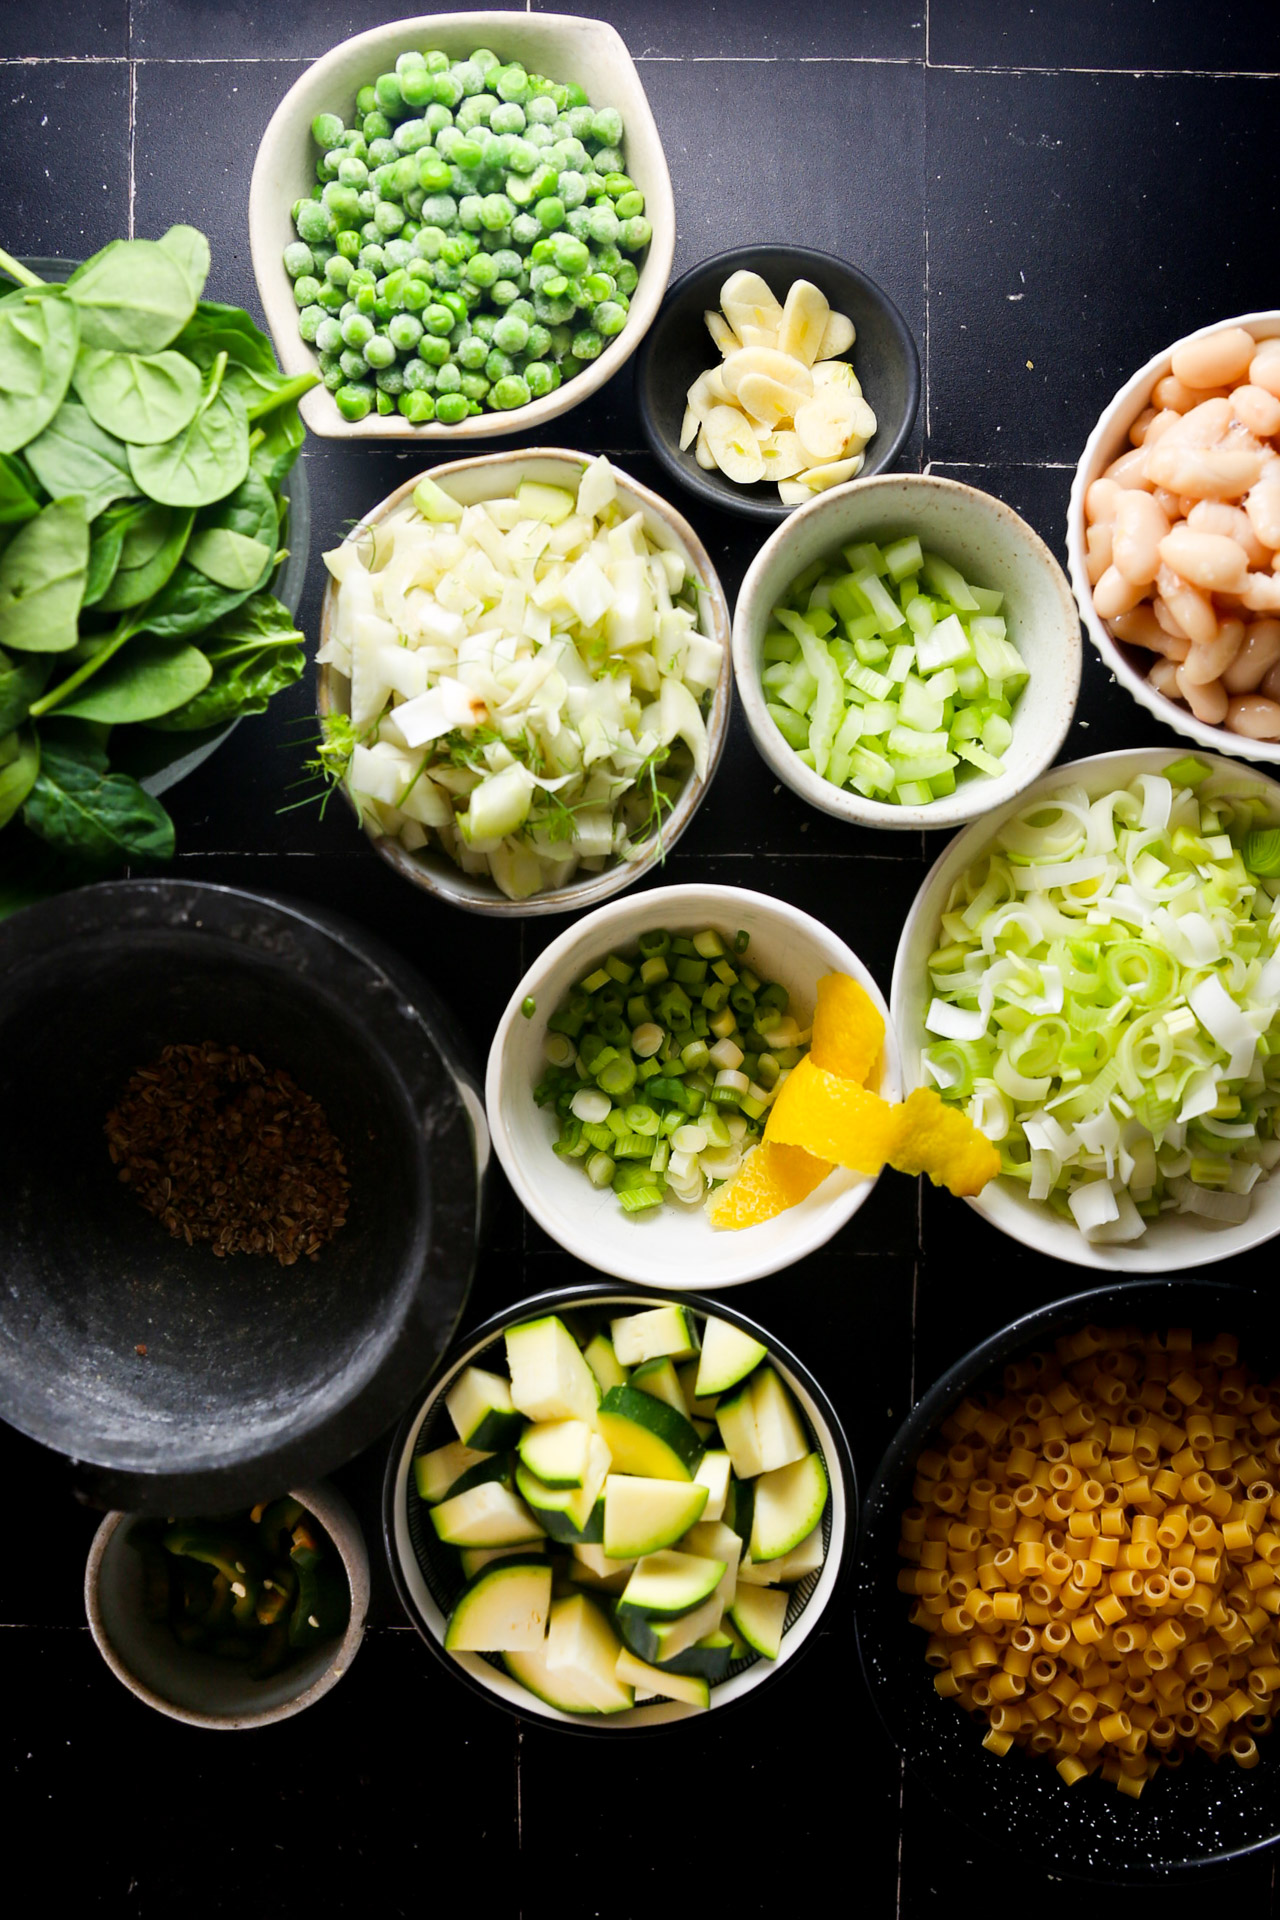 A variety of fresh ingredients carefully arranged in bowls on a black surface, including peas, spinach, sliced zucchinis, leeks, pasta, and spices, focusing on the colors and textures for preparation.